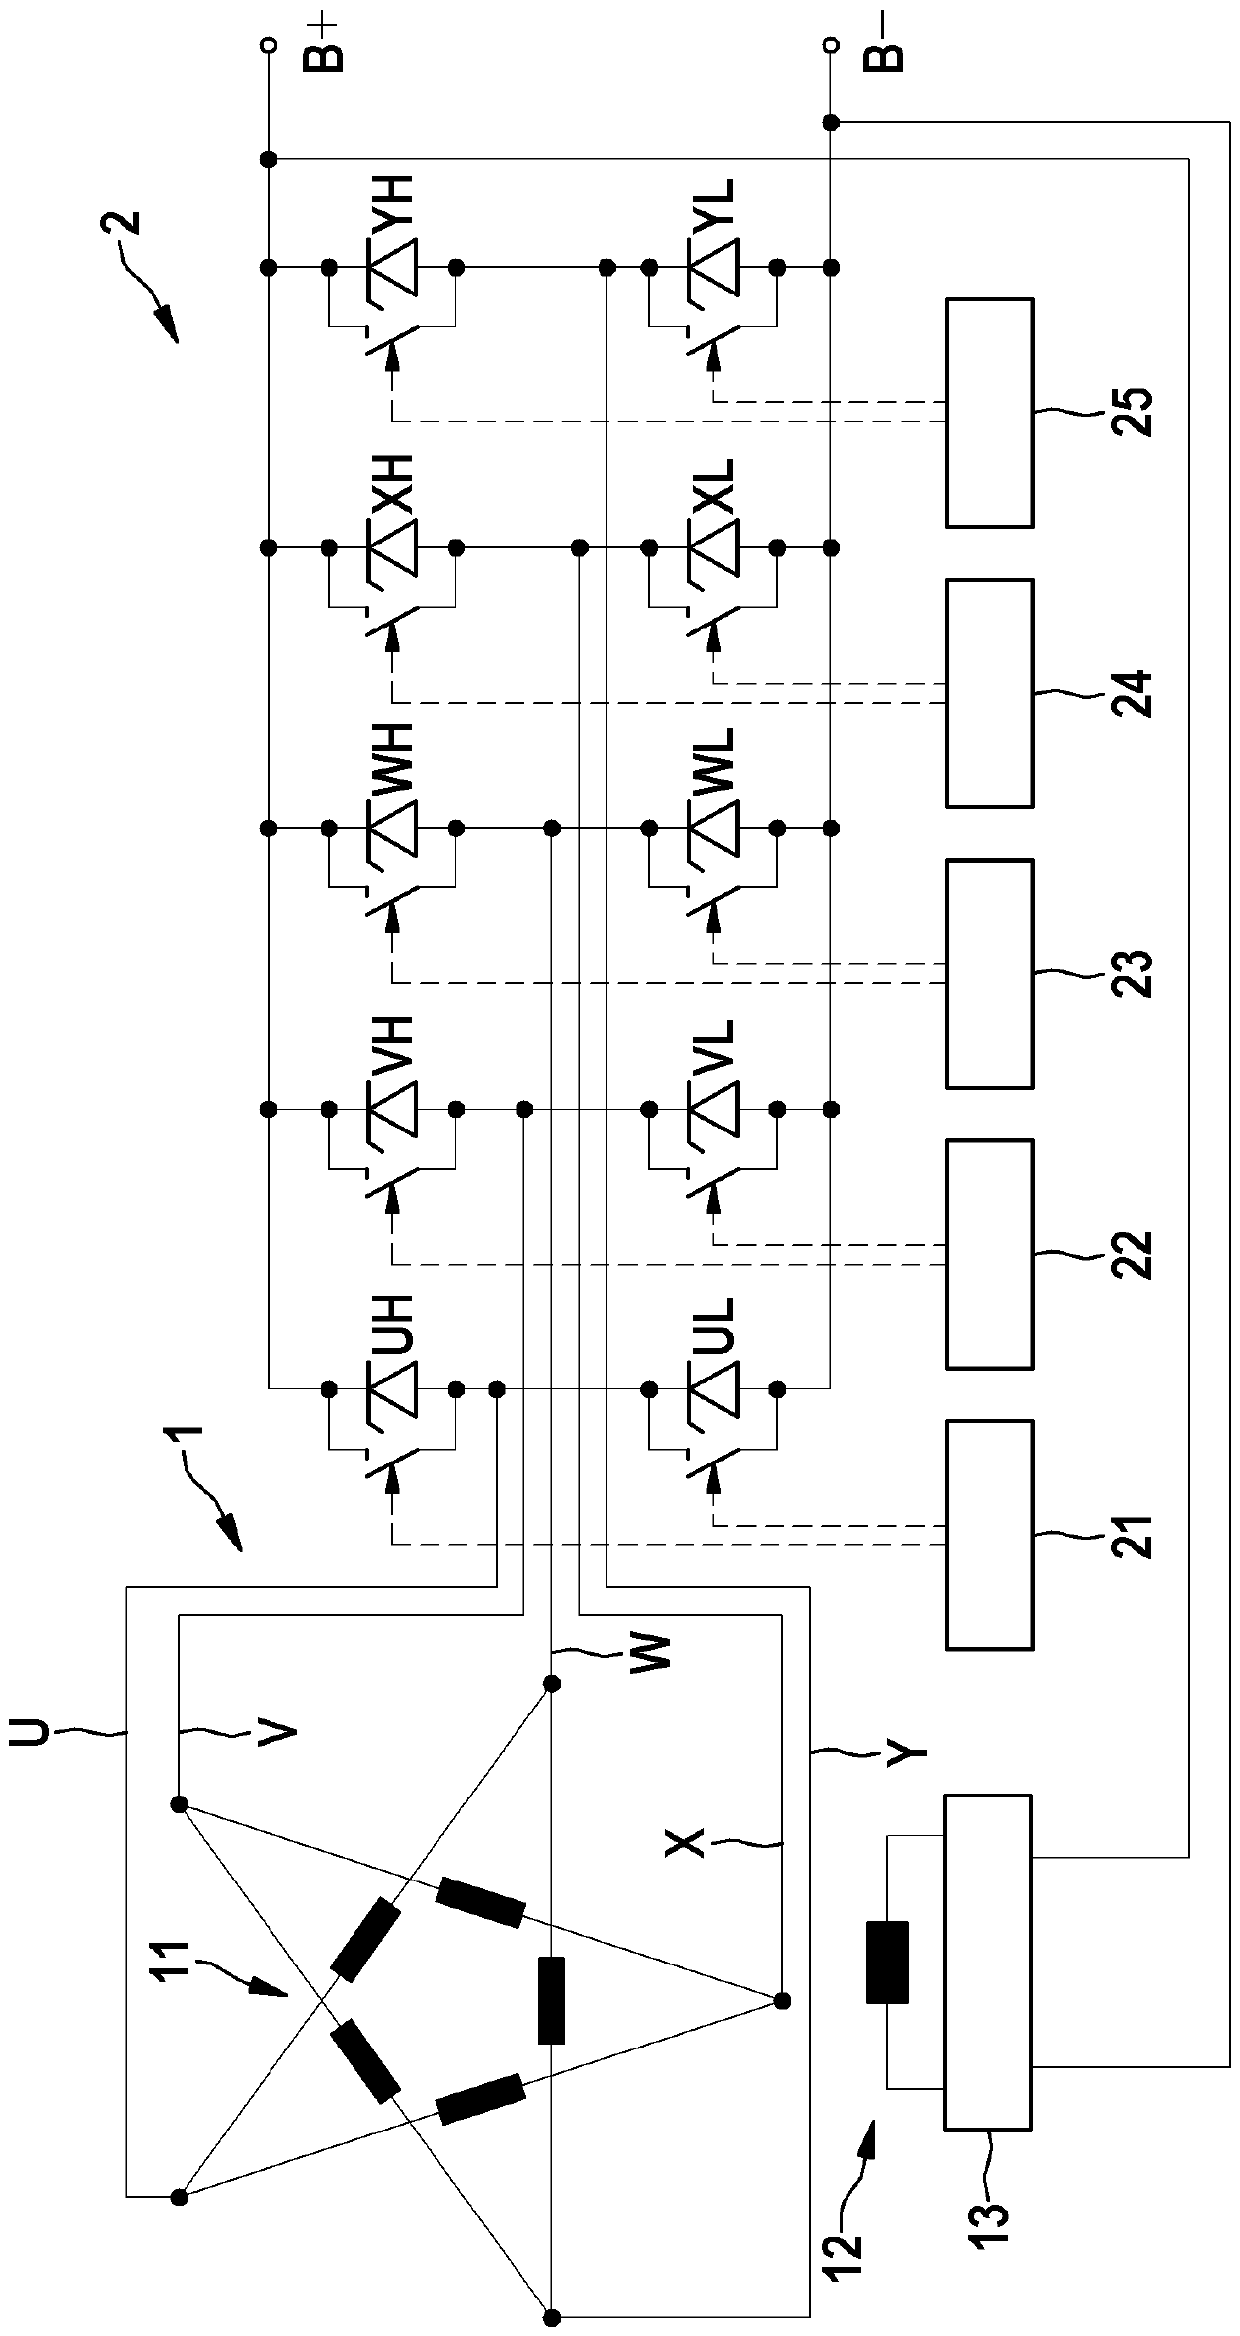 Method and device for exciting a device consisting of an electric motor and an active bridge rectifier